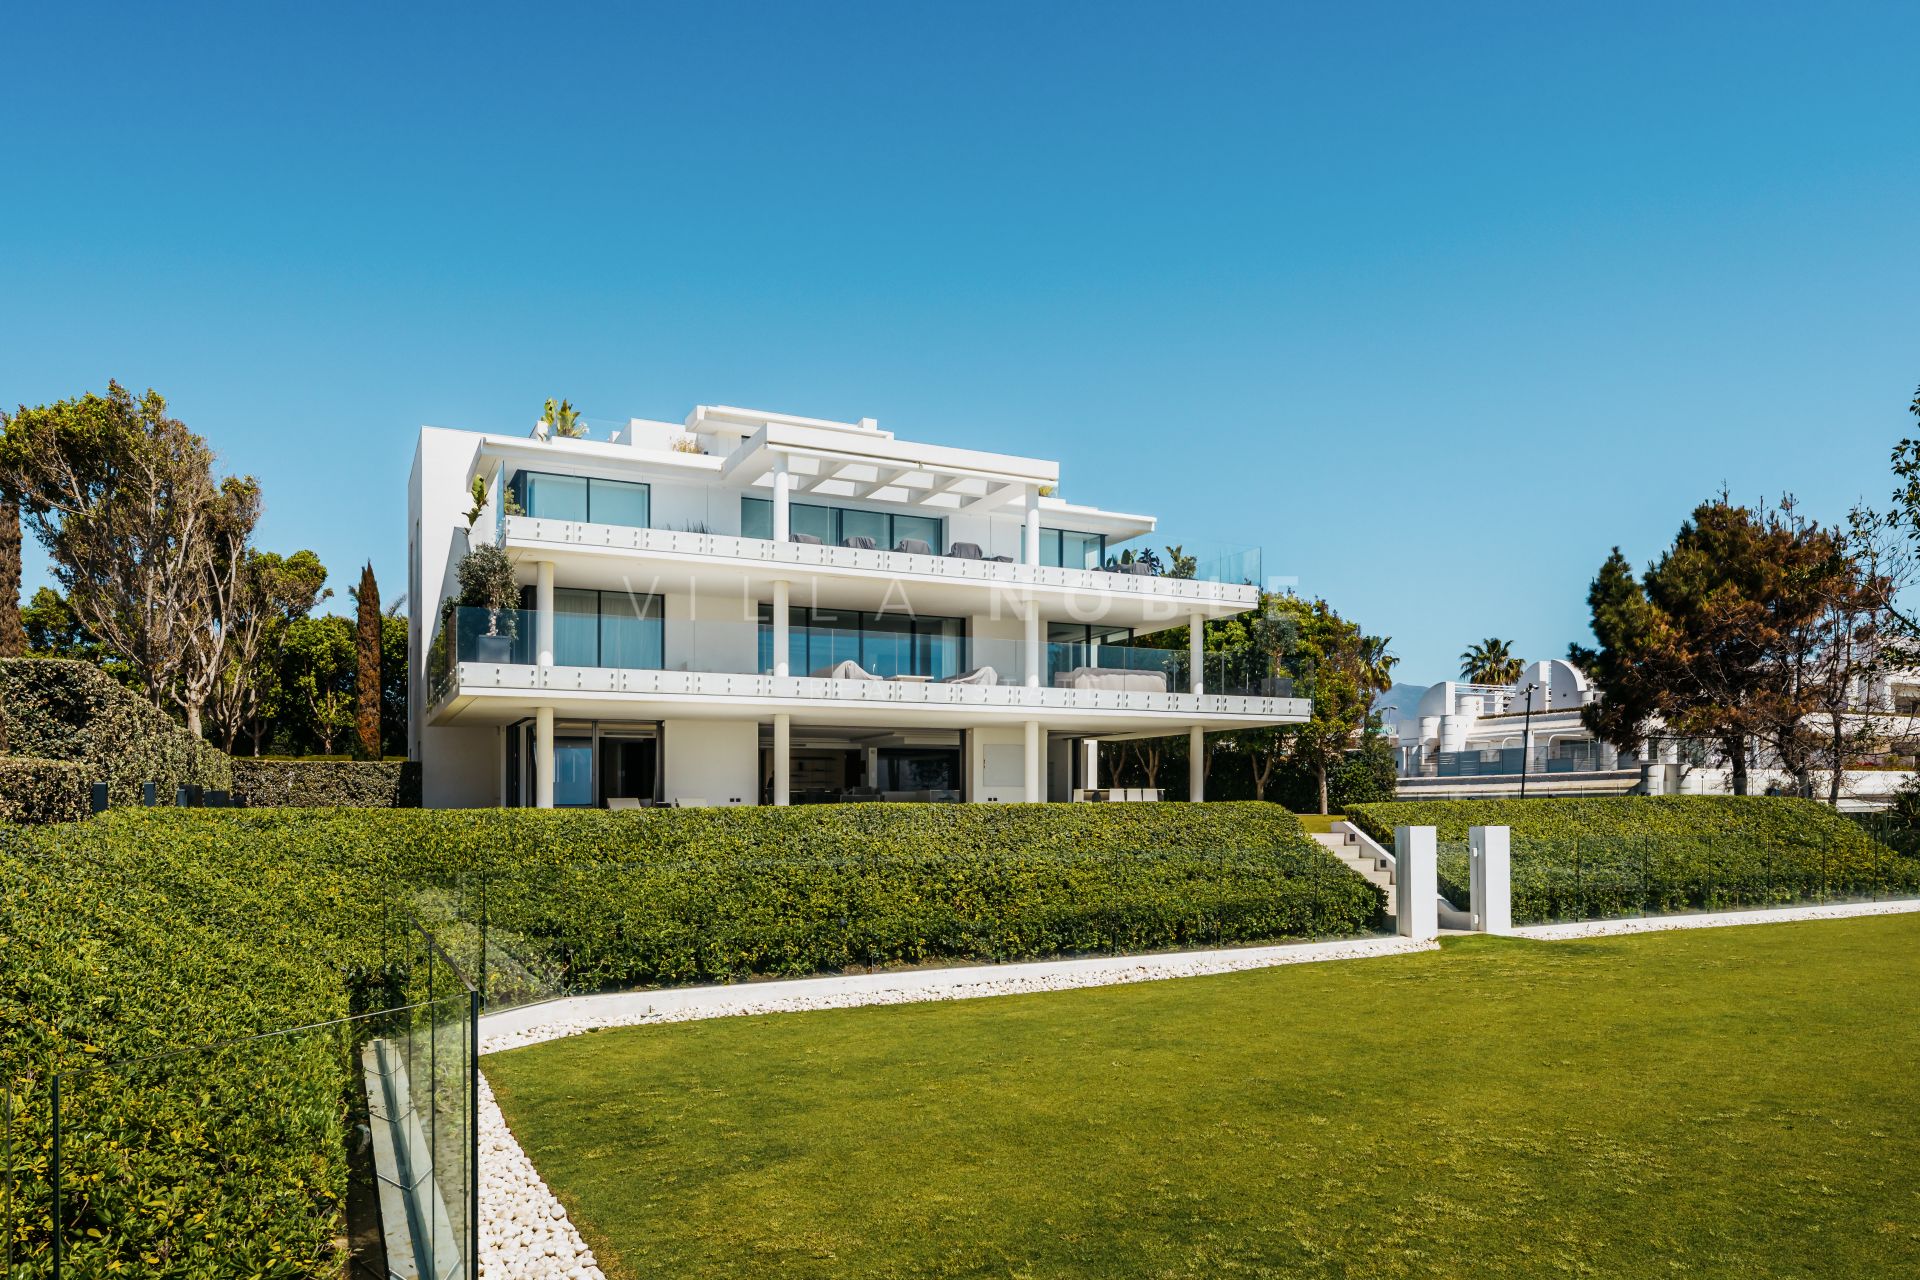 Stunning beachfront ground floor apartment / house for sale is located in Emare, Estepona